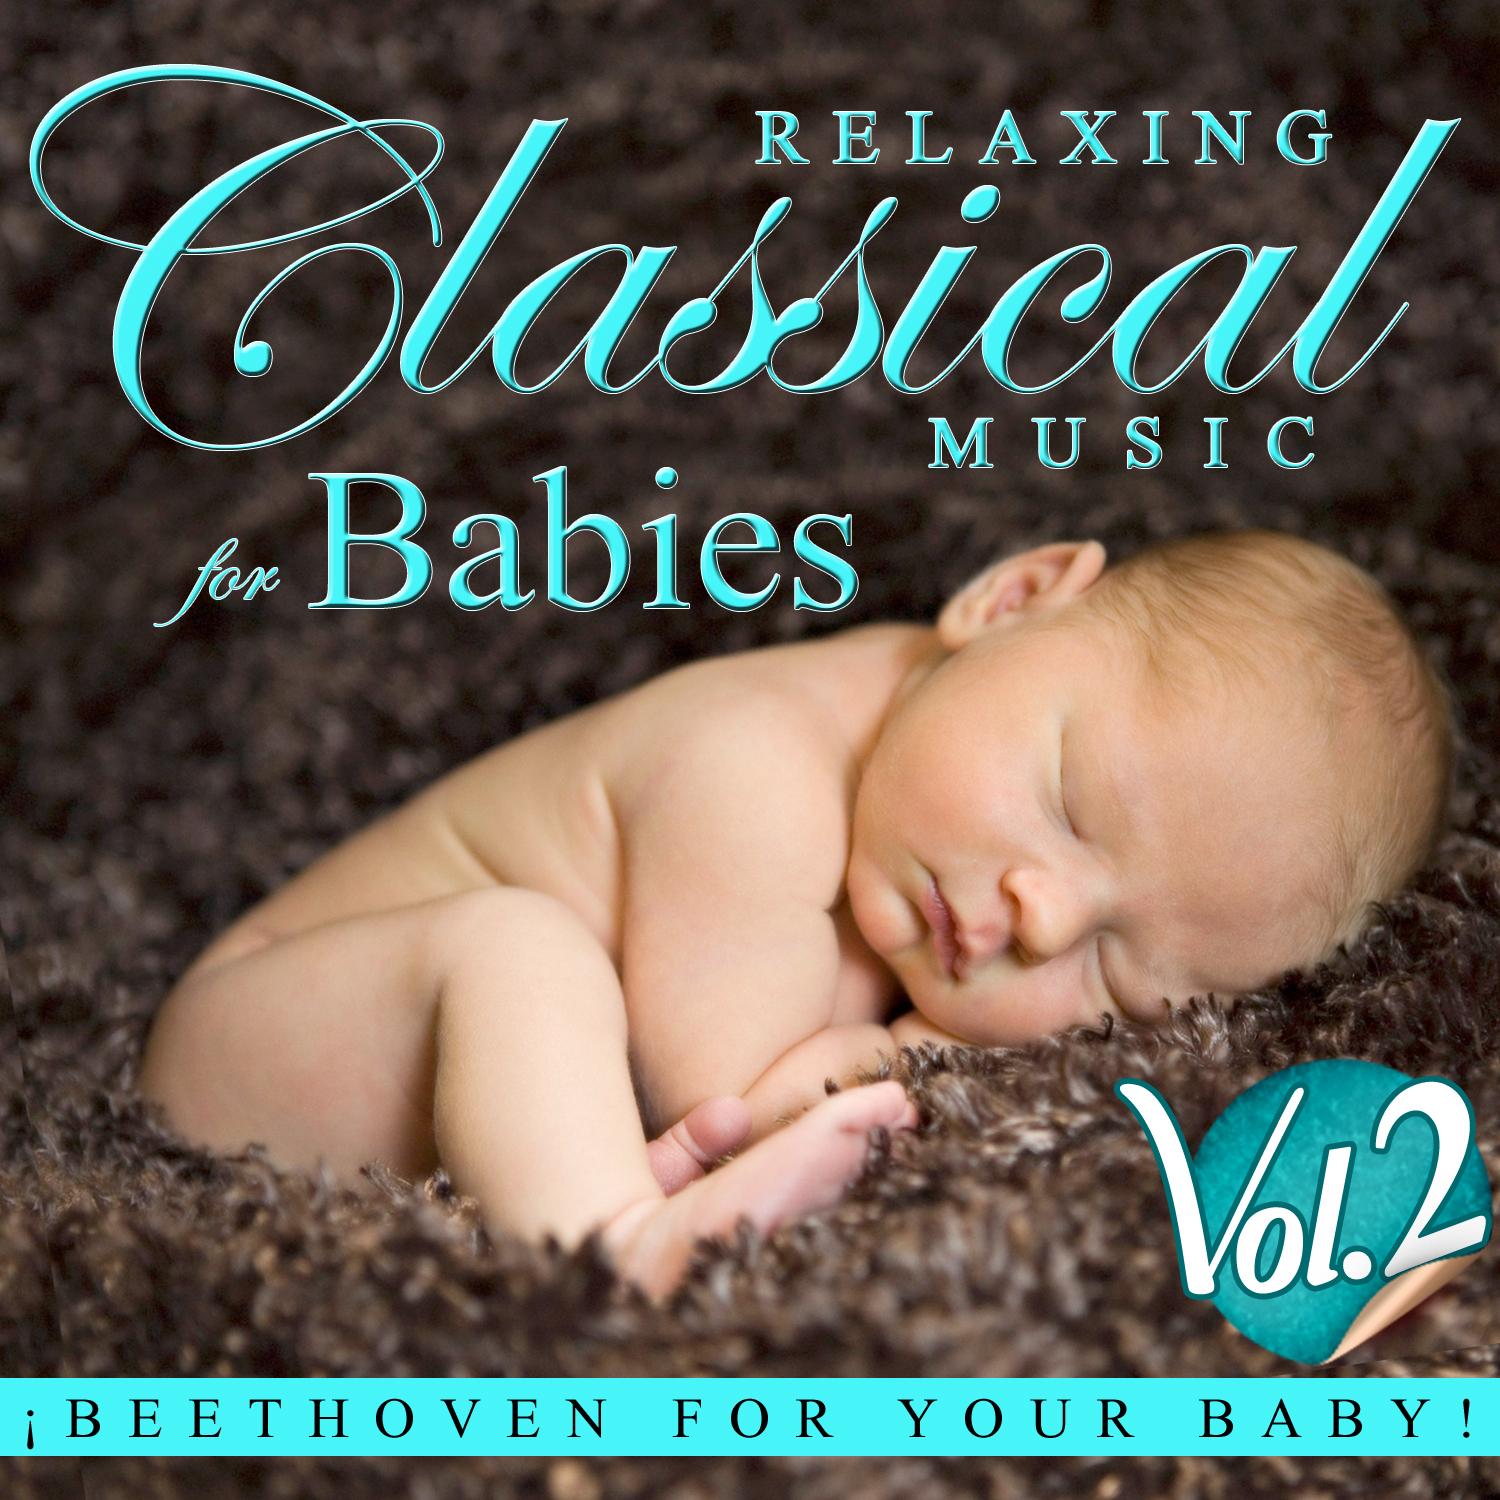 Relaxing Classical Music for Babies. Beethoven for Your Baby Vol. 2